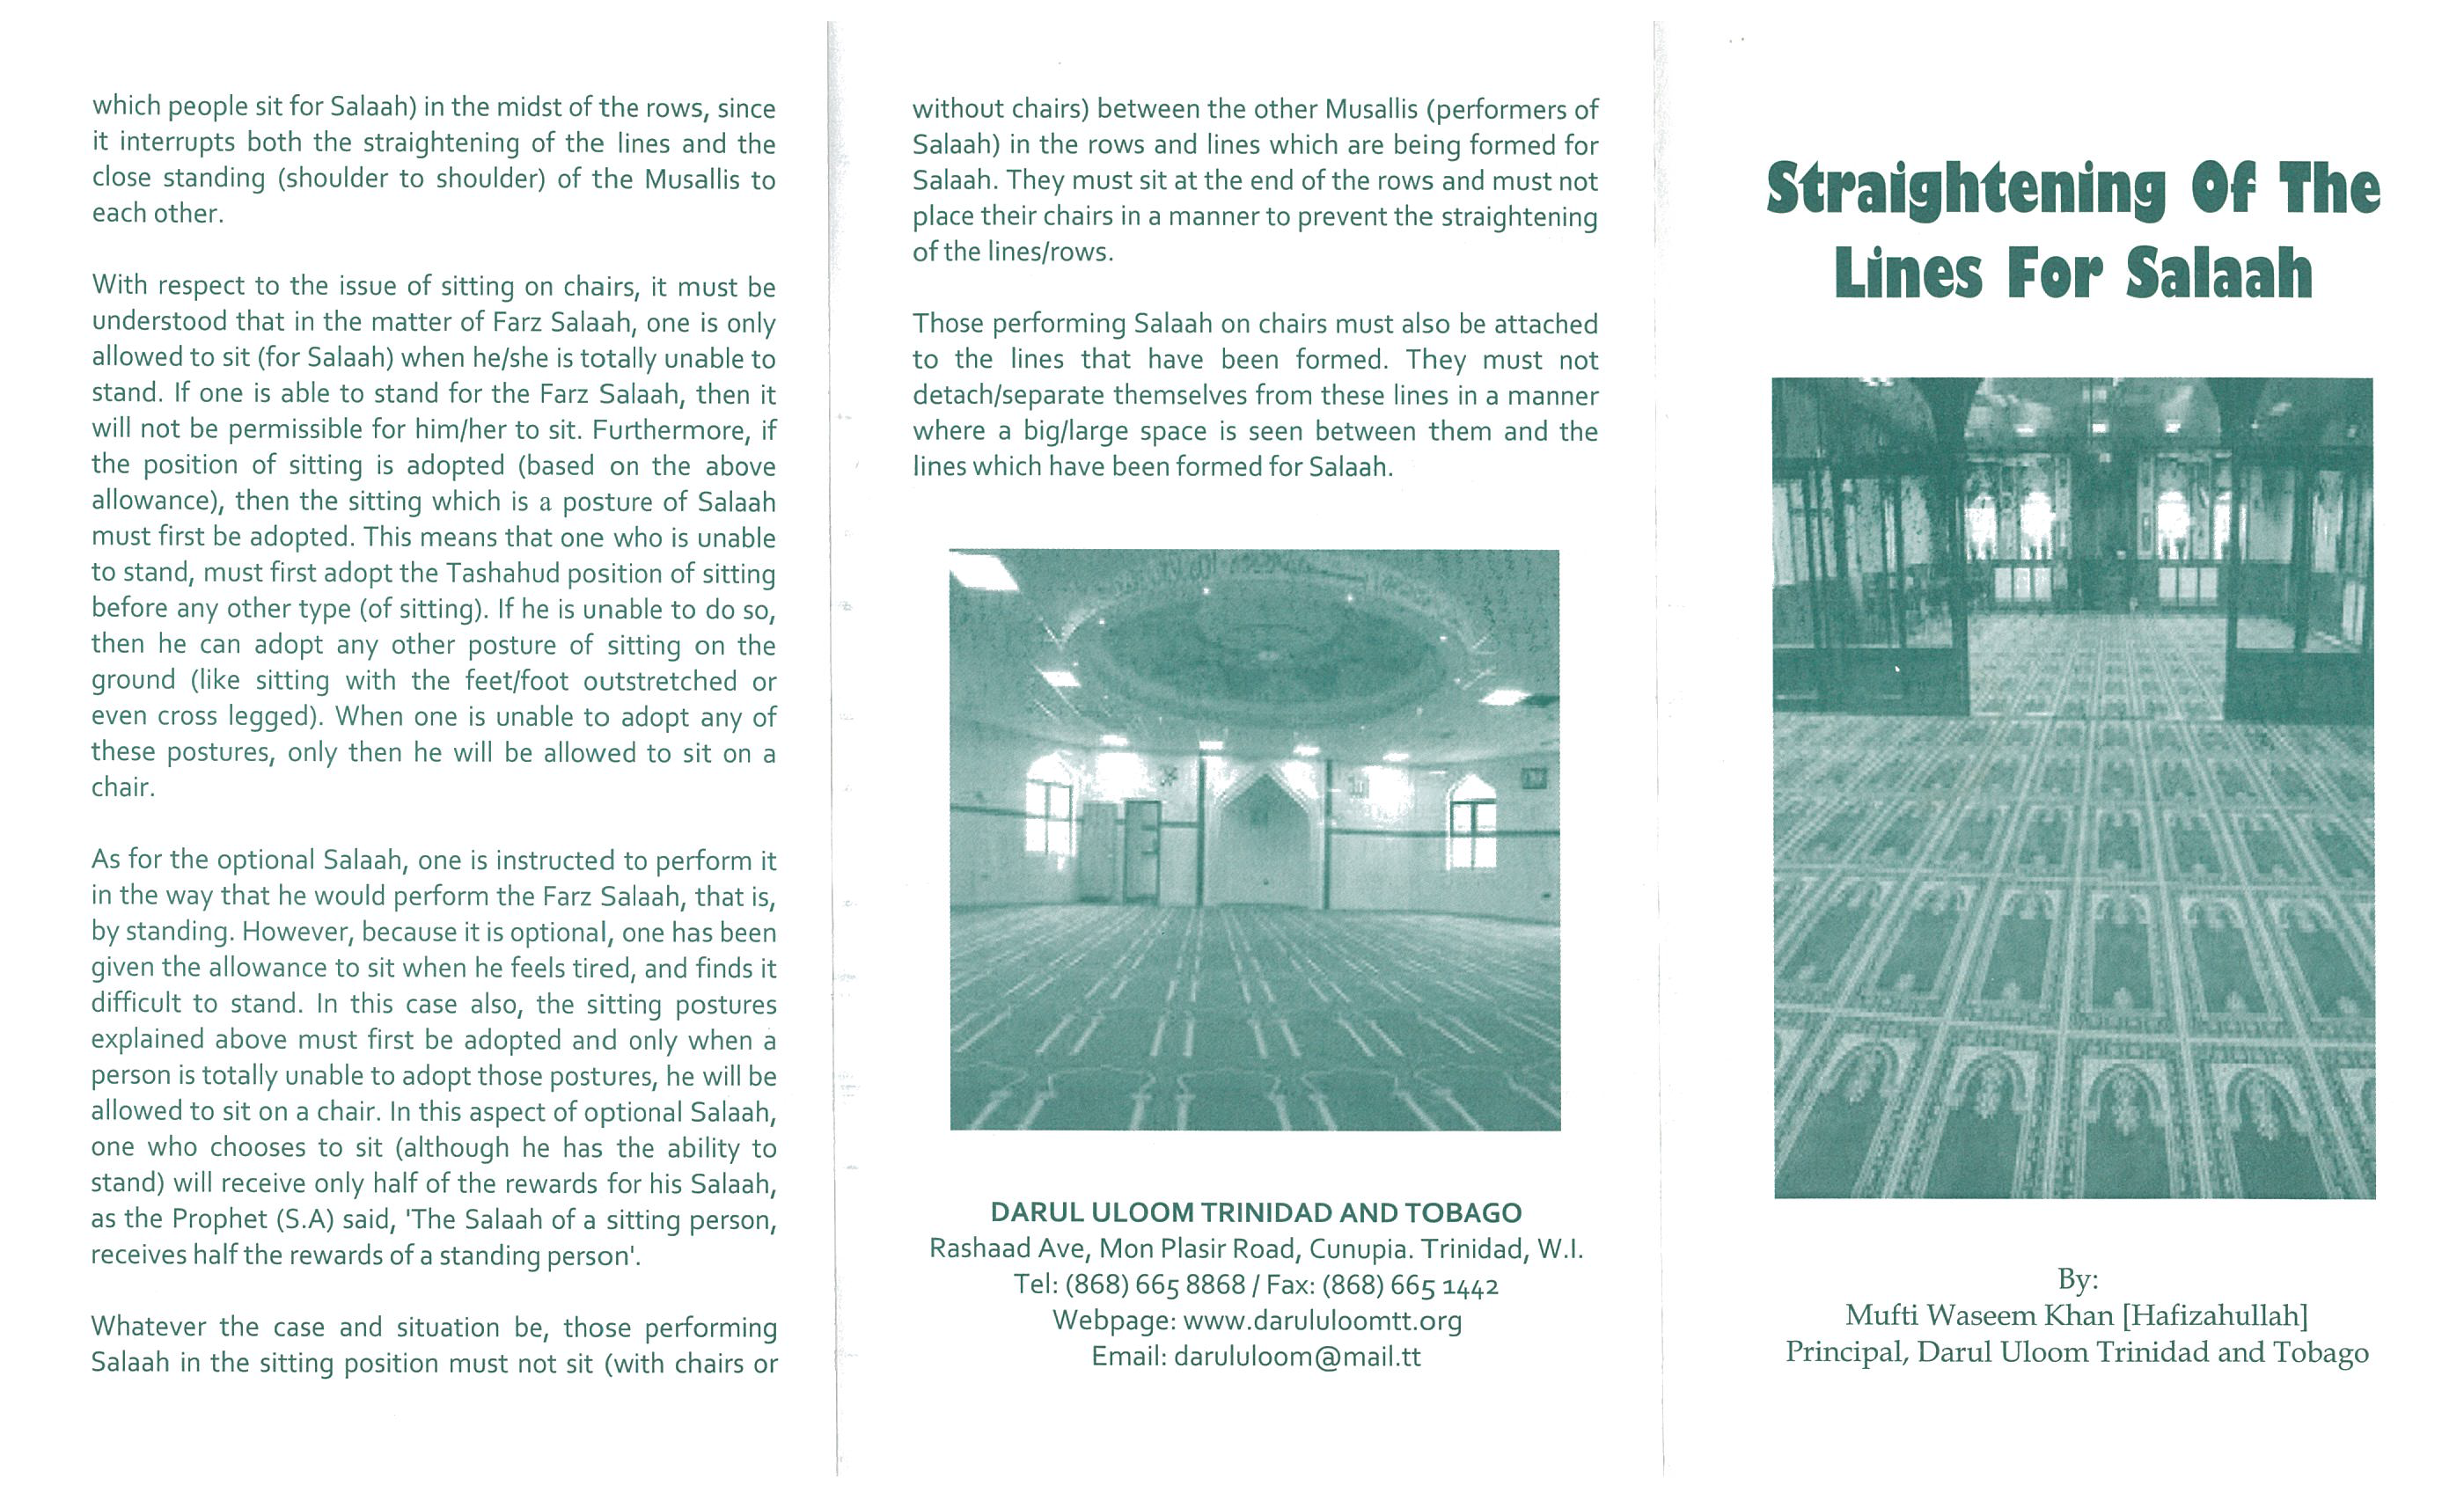 Straightening of the Lines For Salaah (pamphlet)